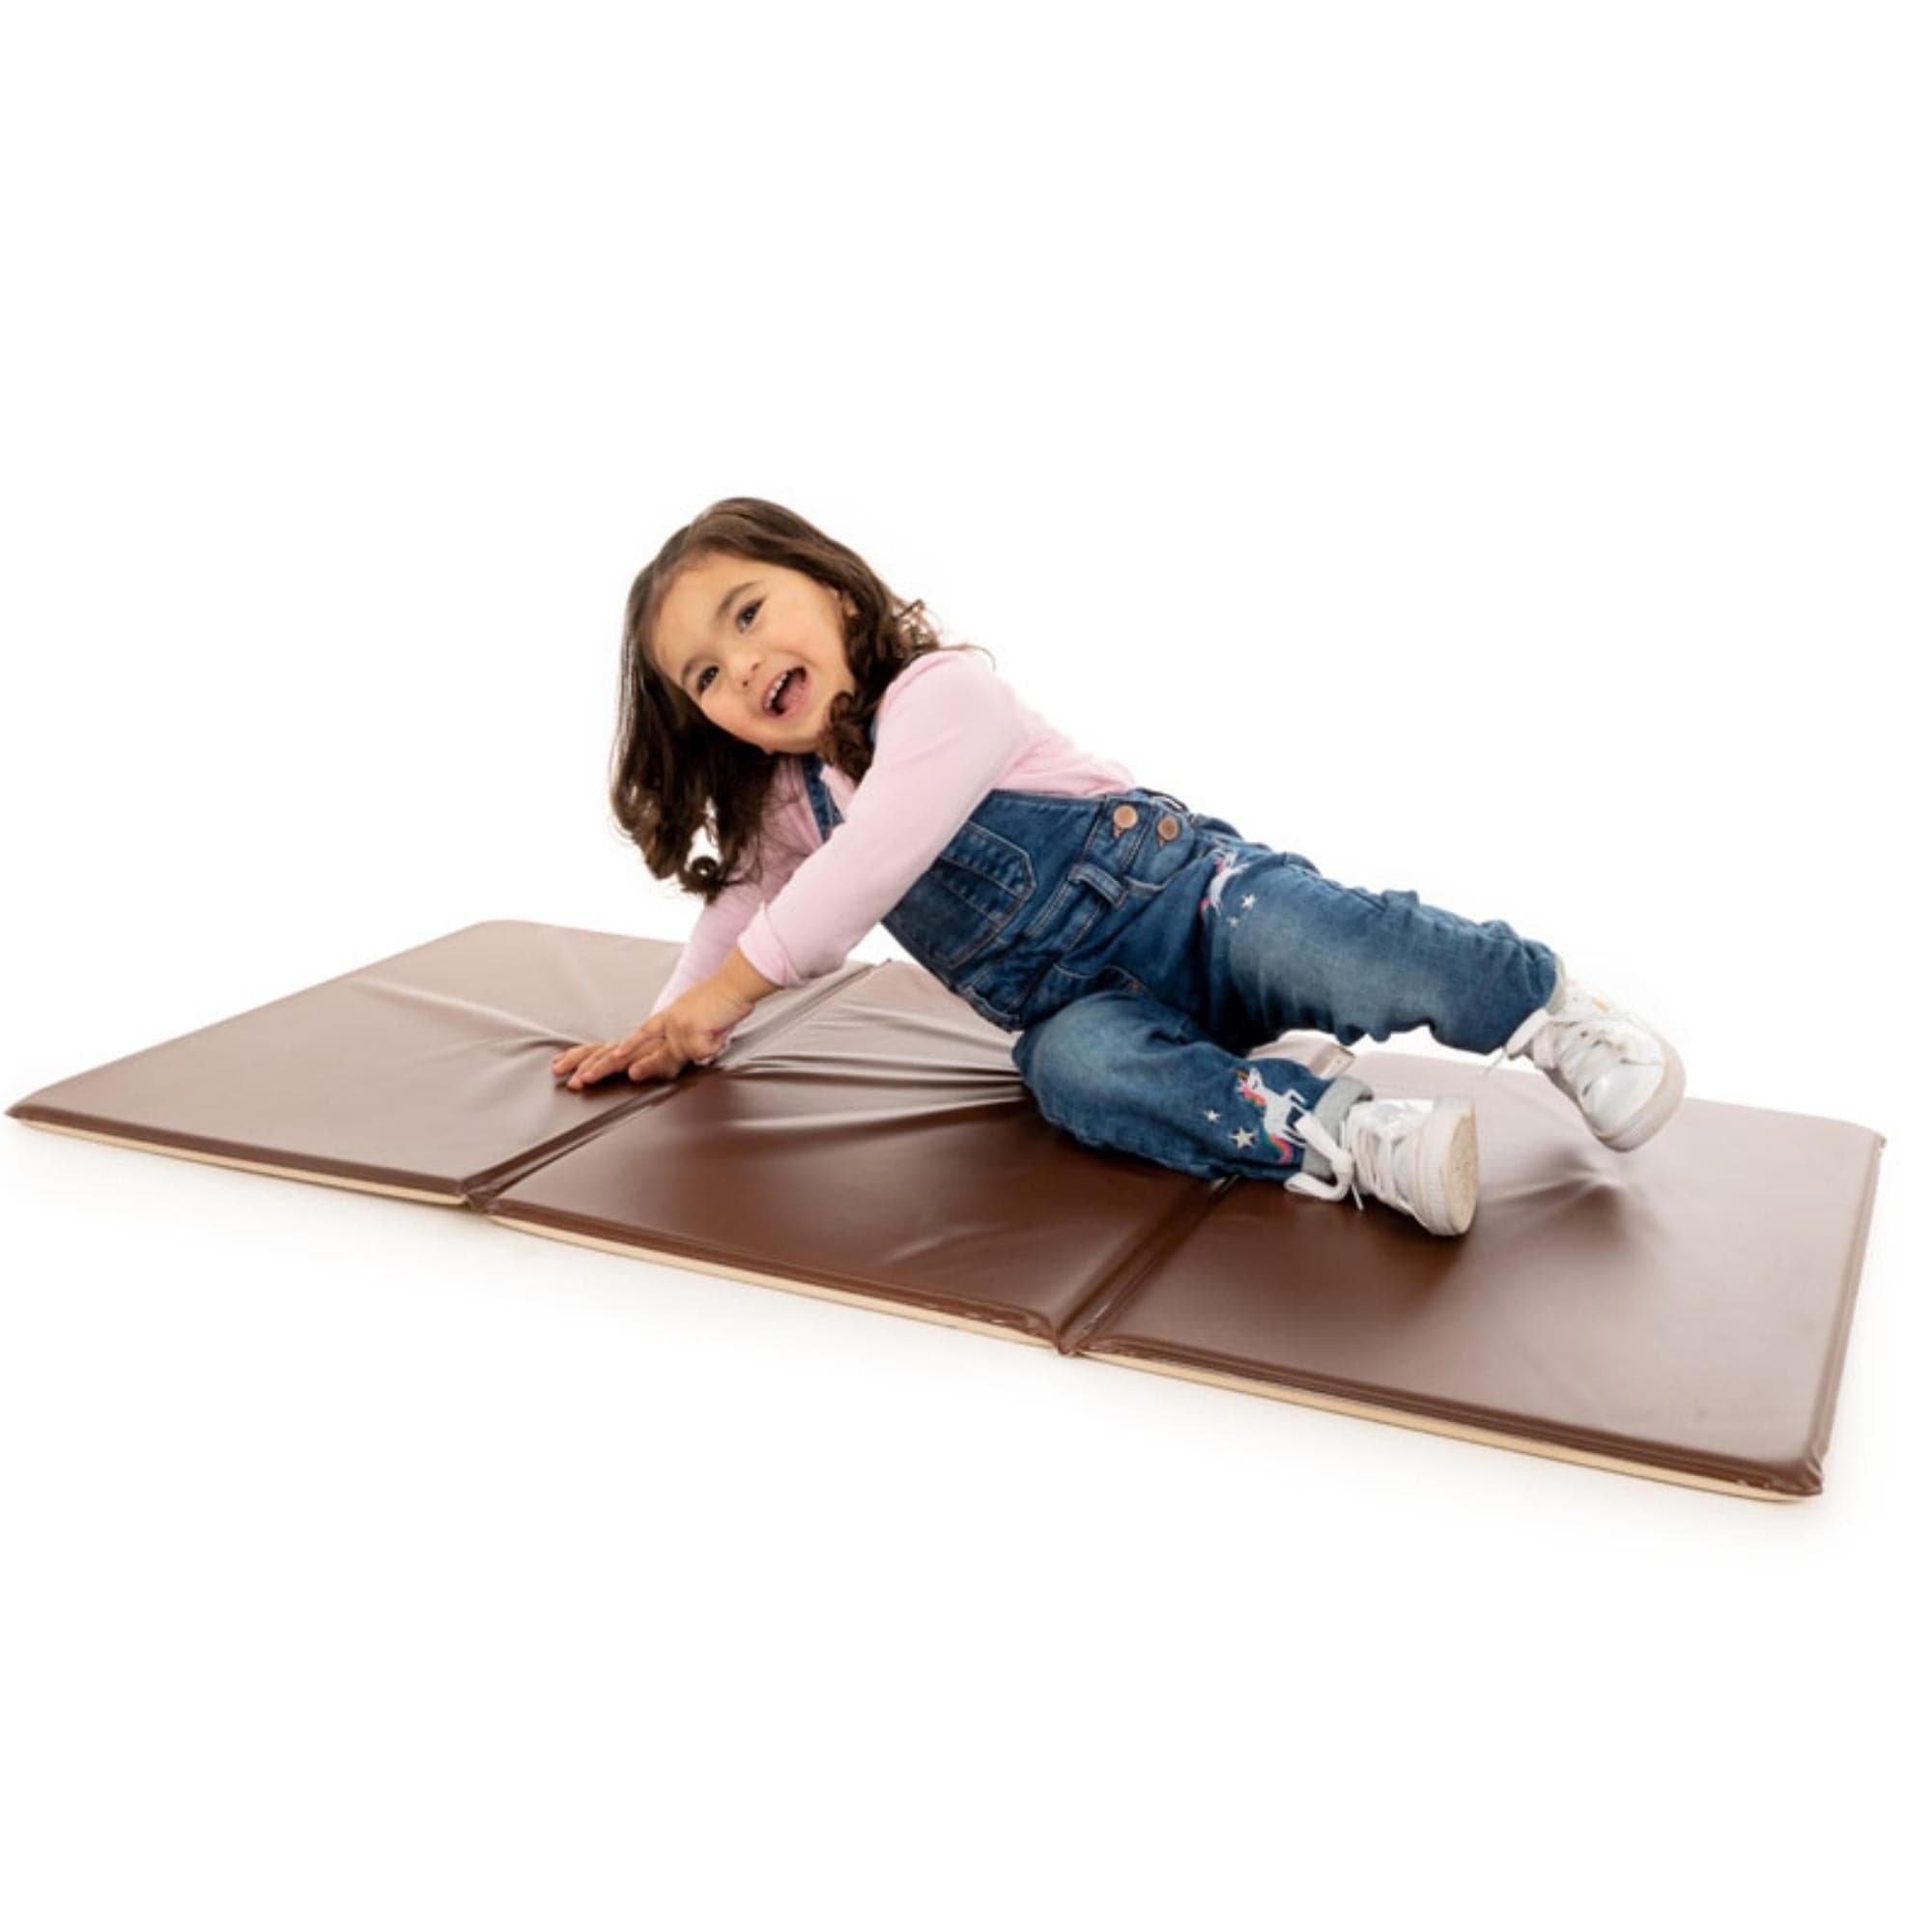 Early Years Value Sleep Mat set of 10 - Brown and Cream, The Early Years Value Sleep Mat set of 10 in Brown and Cream is a carefully designed product that prioritizes both comfort and practicality. It's a perfect addition to nurseries, preschools, or any Early Years settings where daytime sleep or rest periods are part of the schedule. Early Years Value Sleep Mat set of 10 - Brown and Cream Features: Soft Material and Comfort: These Early Years Value Sleep Mats are made with a soft surface and mattress fill